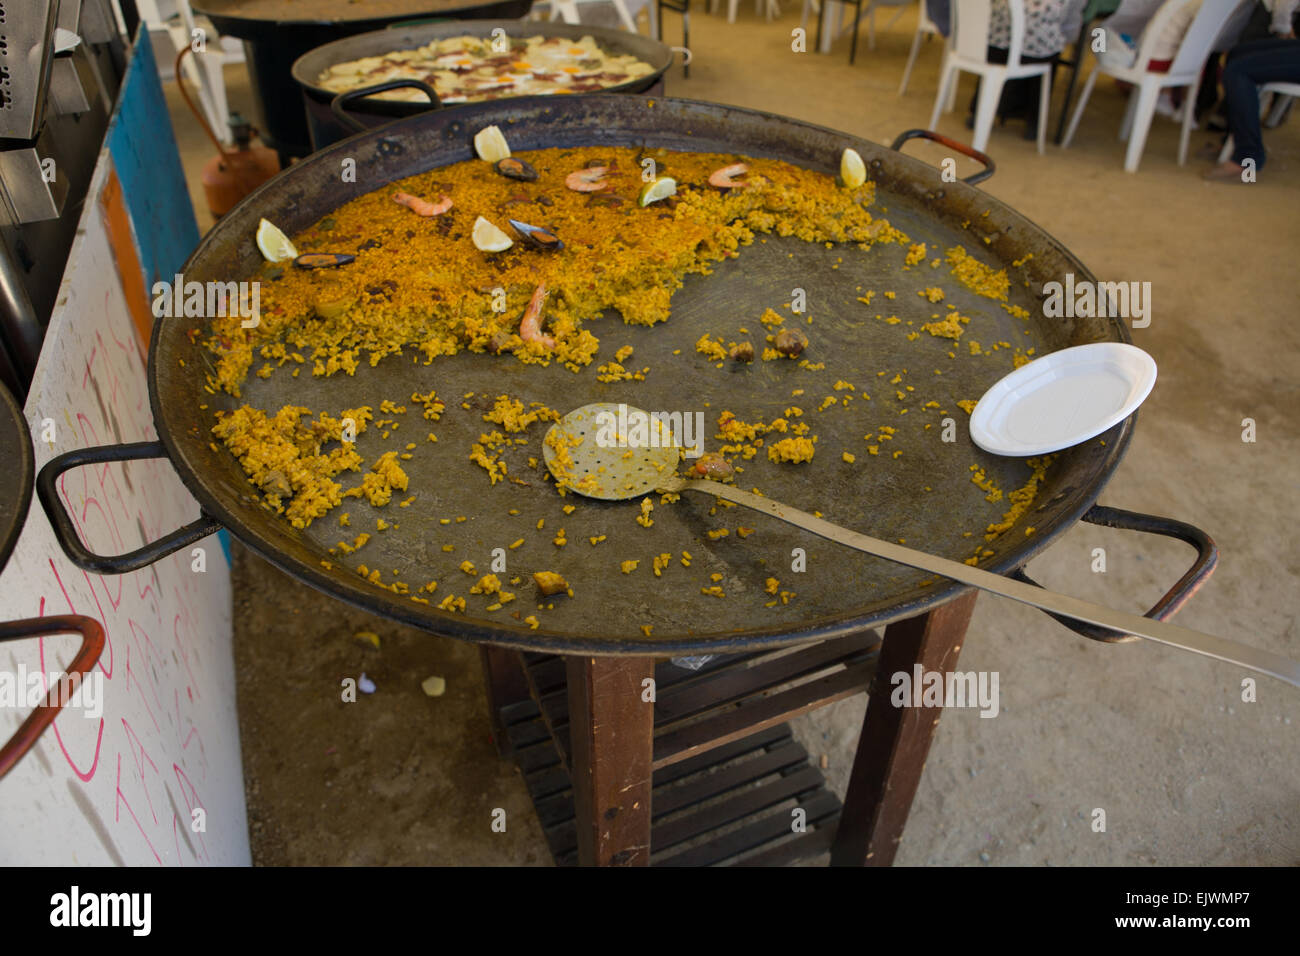 A huge paella, a Spanish traditional dish, at the Cordoba fair, Spain, in the old-fashioned way Stock Photo